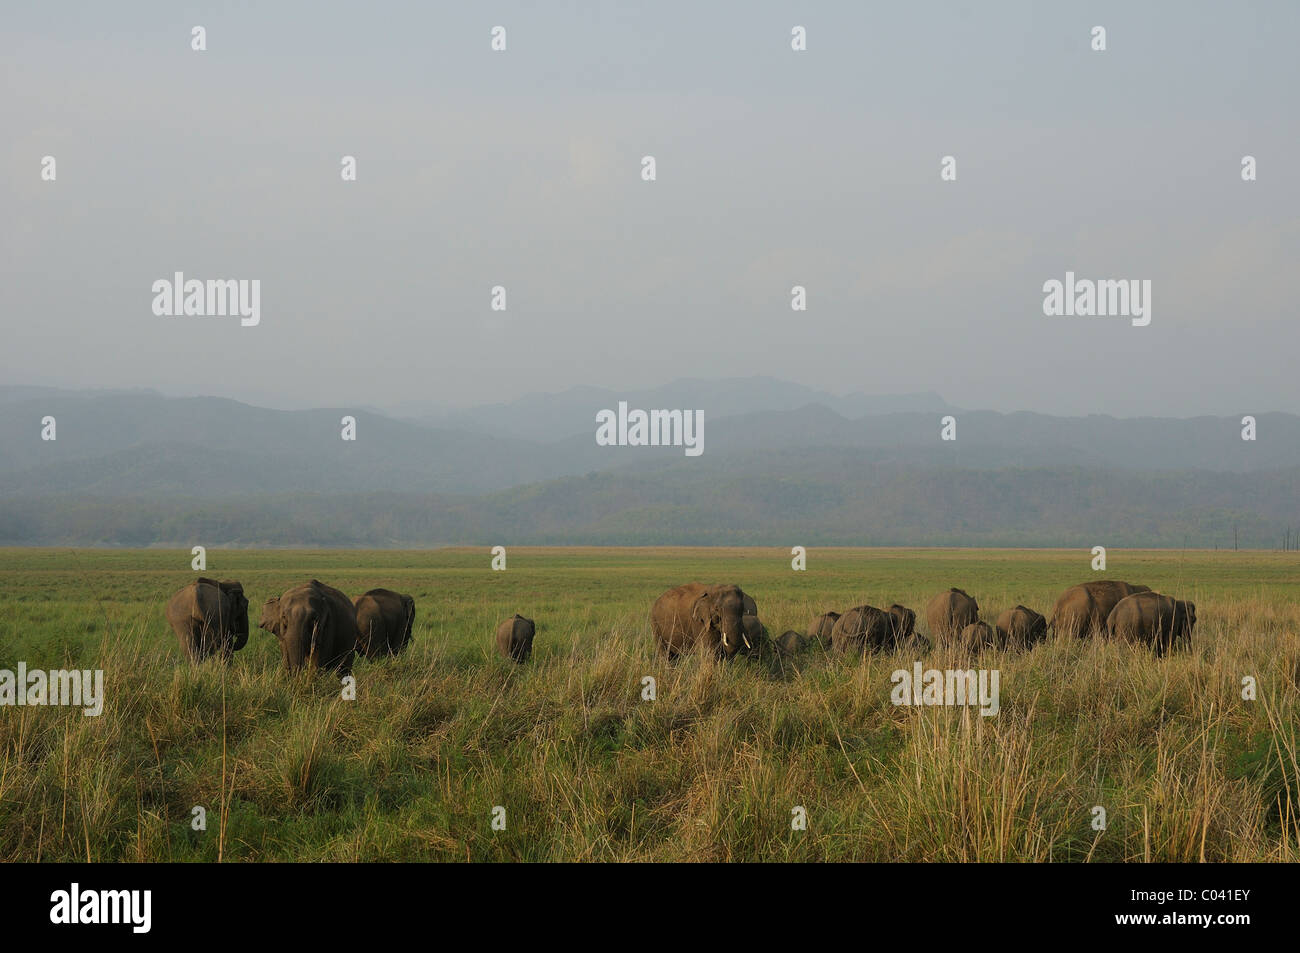 Wide-angle perspective of an elephant herd in the grasslands of Dhikala in Jim Corbett Tiger Reserve, India Stock Photo